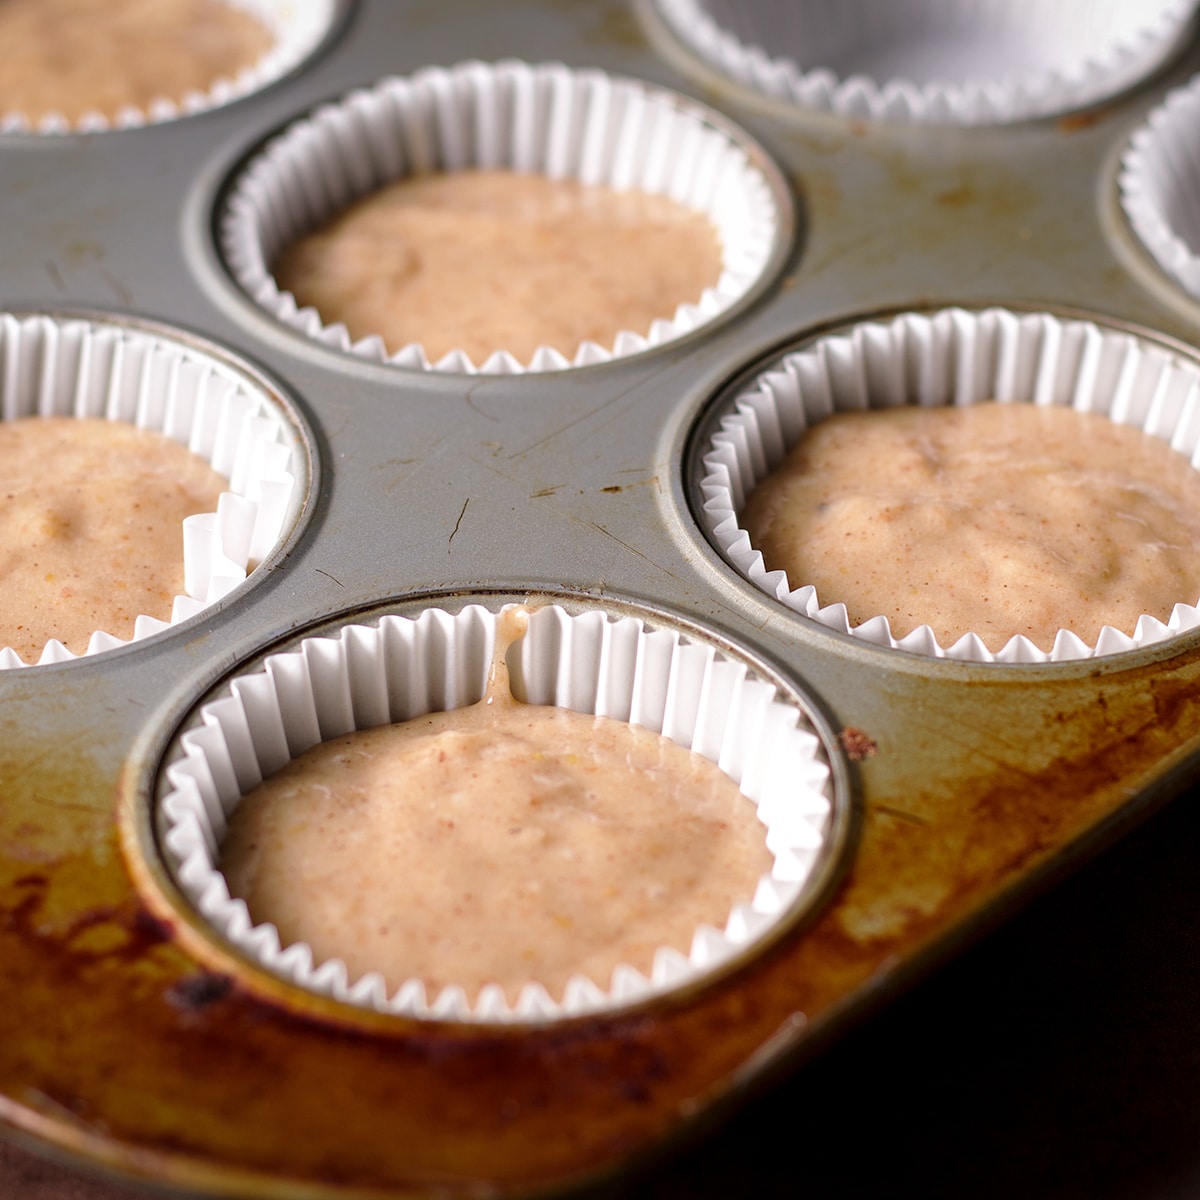 A muffin pan filled with raw muffin batter ready to bake.